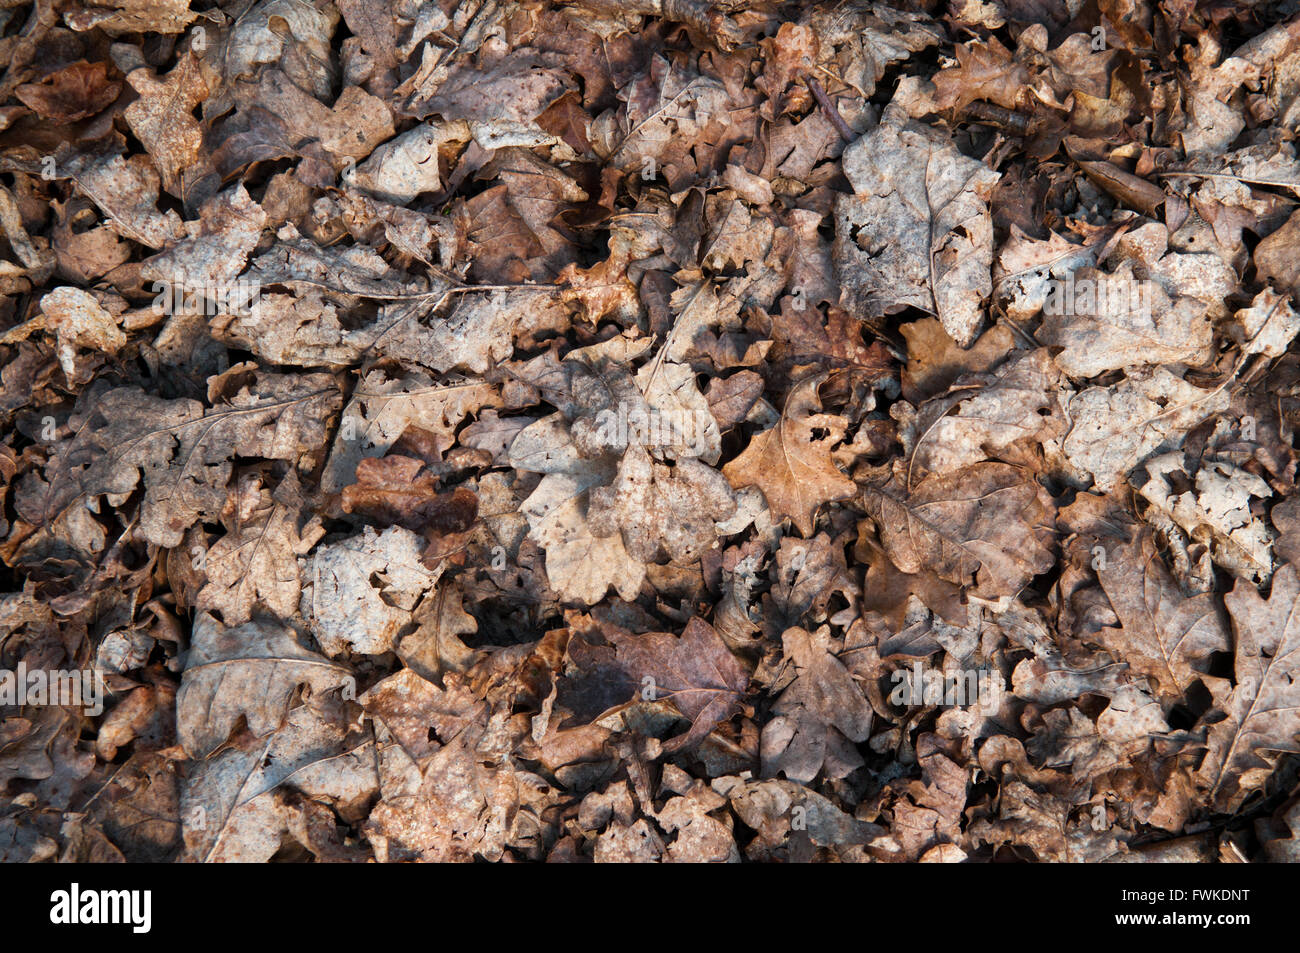 Brown leaves covering the forest floor in Autumn Stock Photo